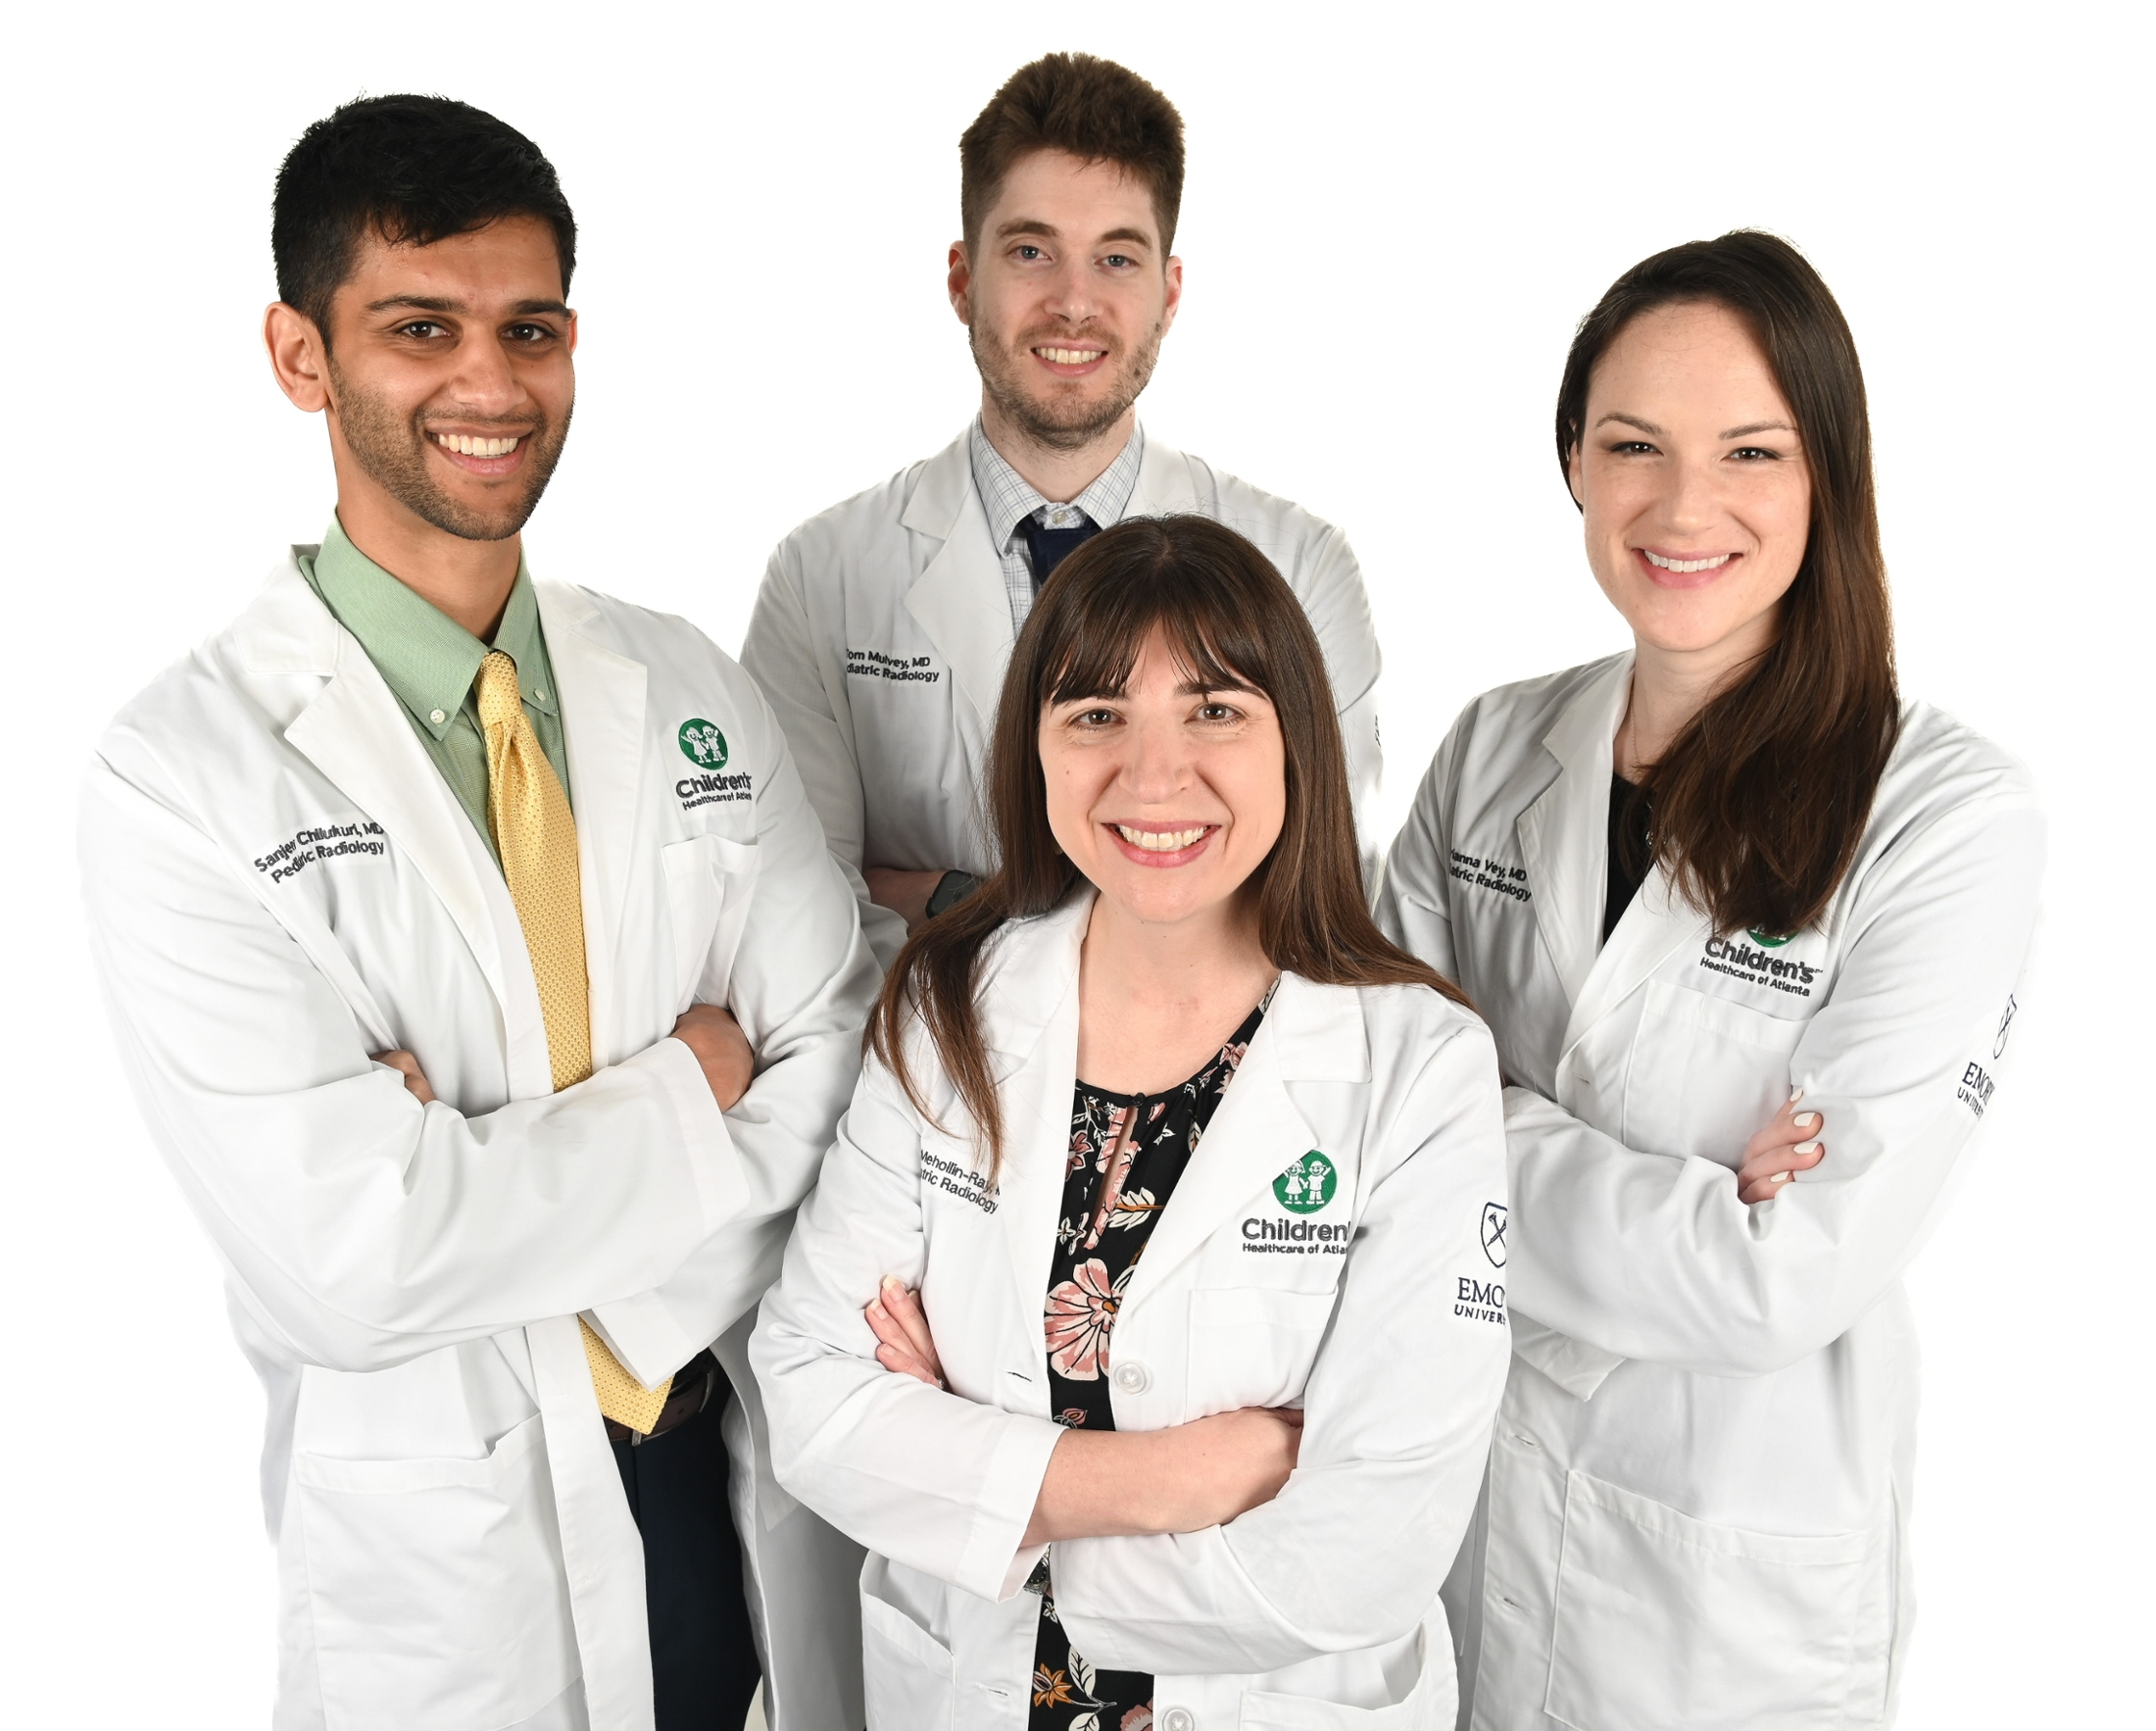 4 smiling people wearing white doctor coats with their arms crossed in front of themselves